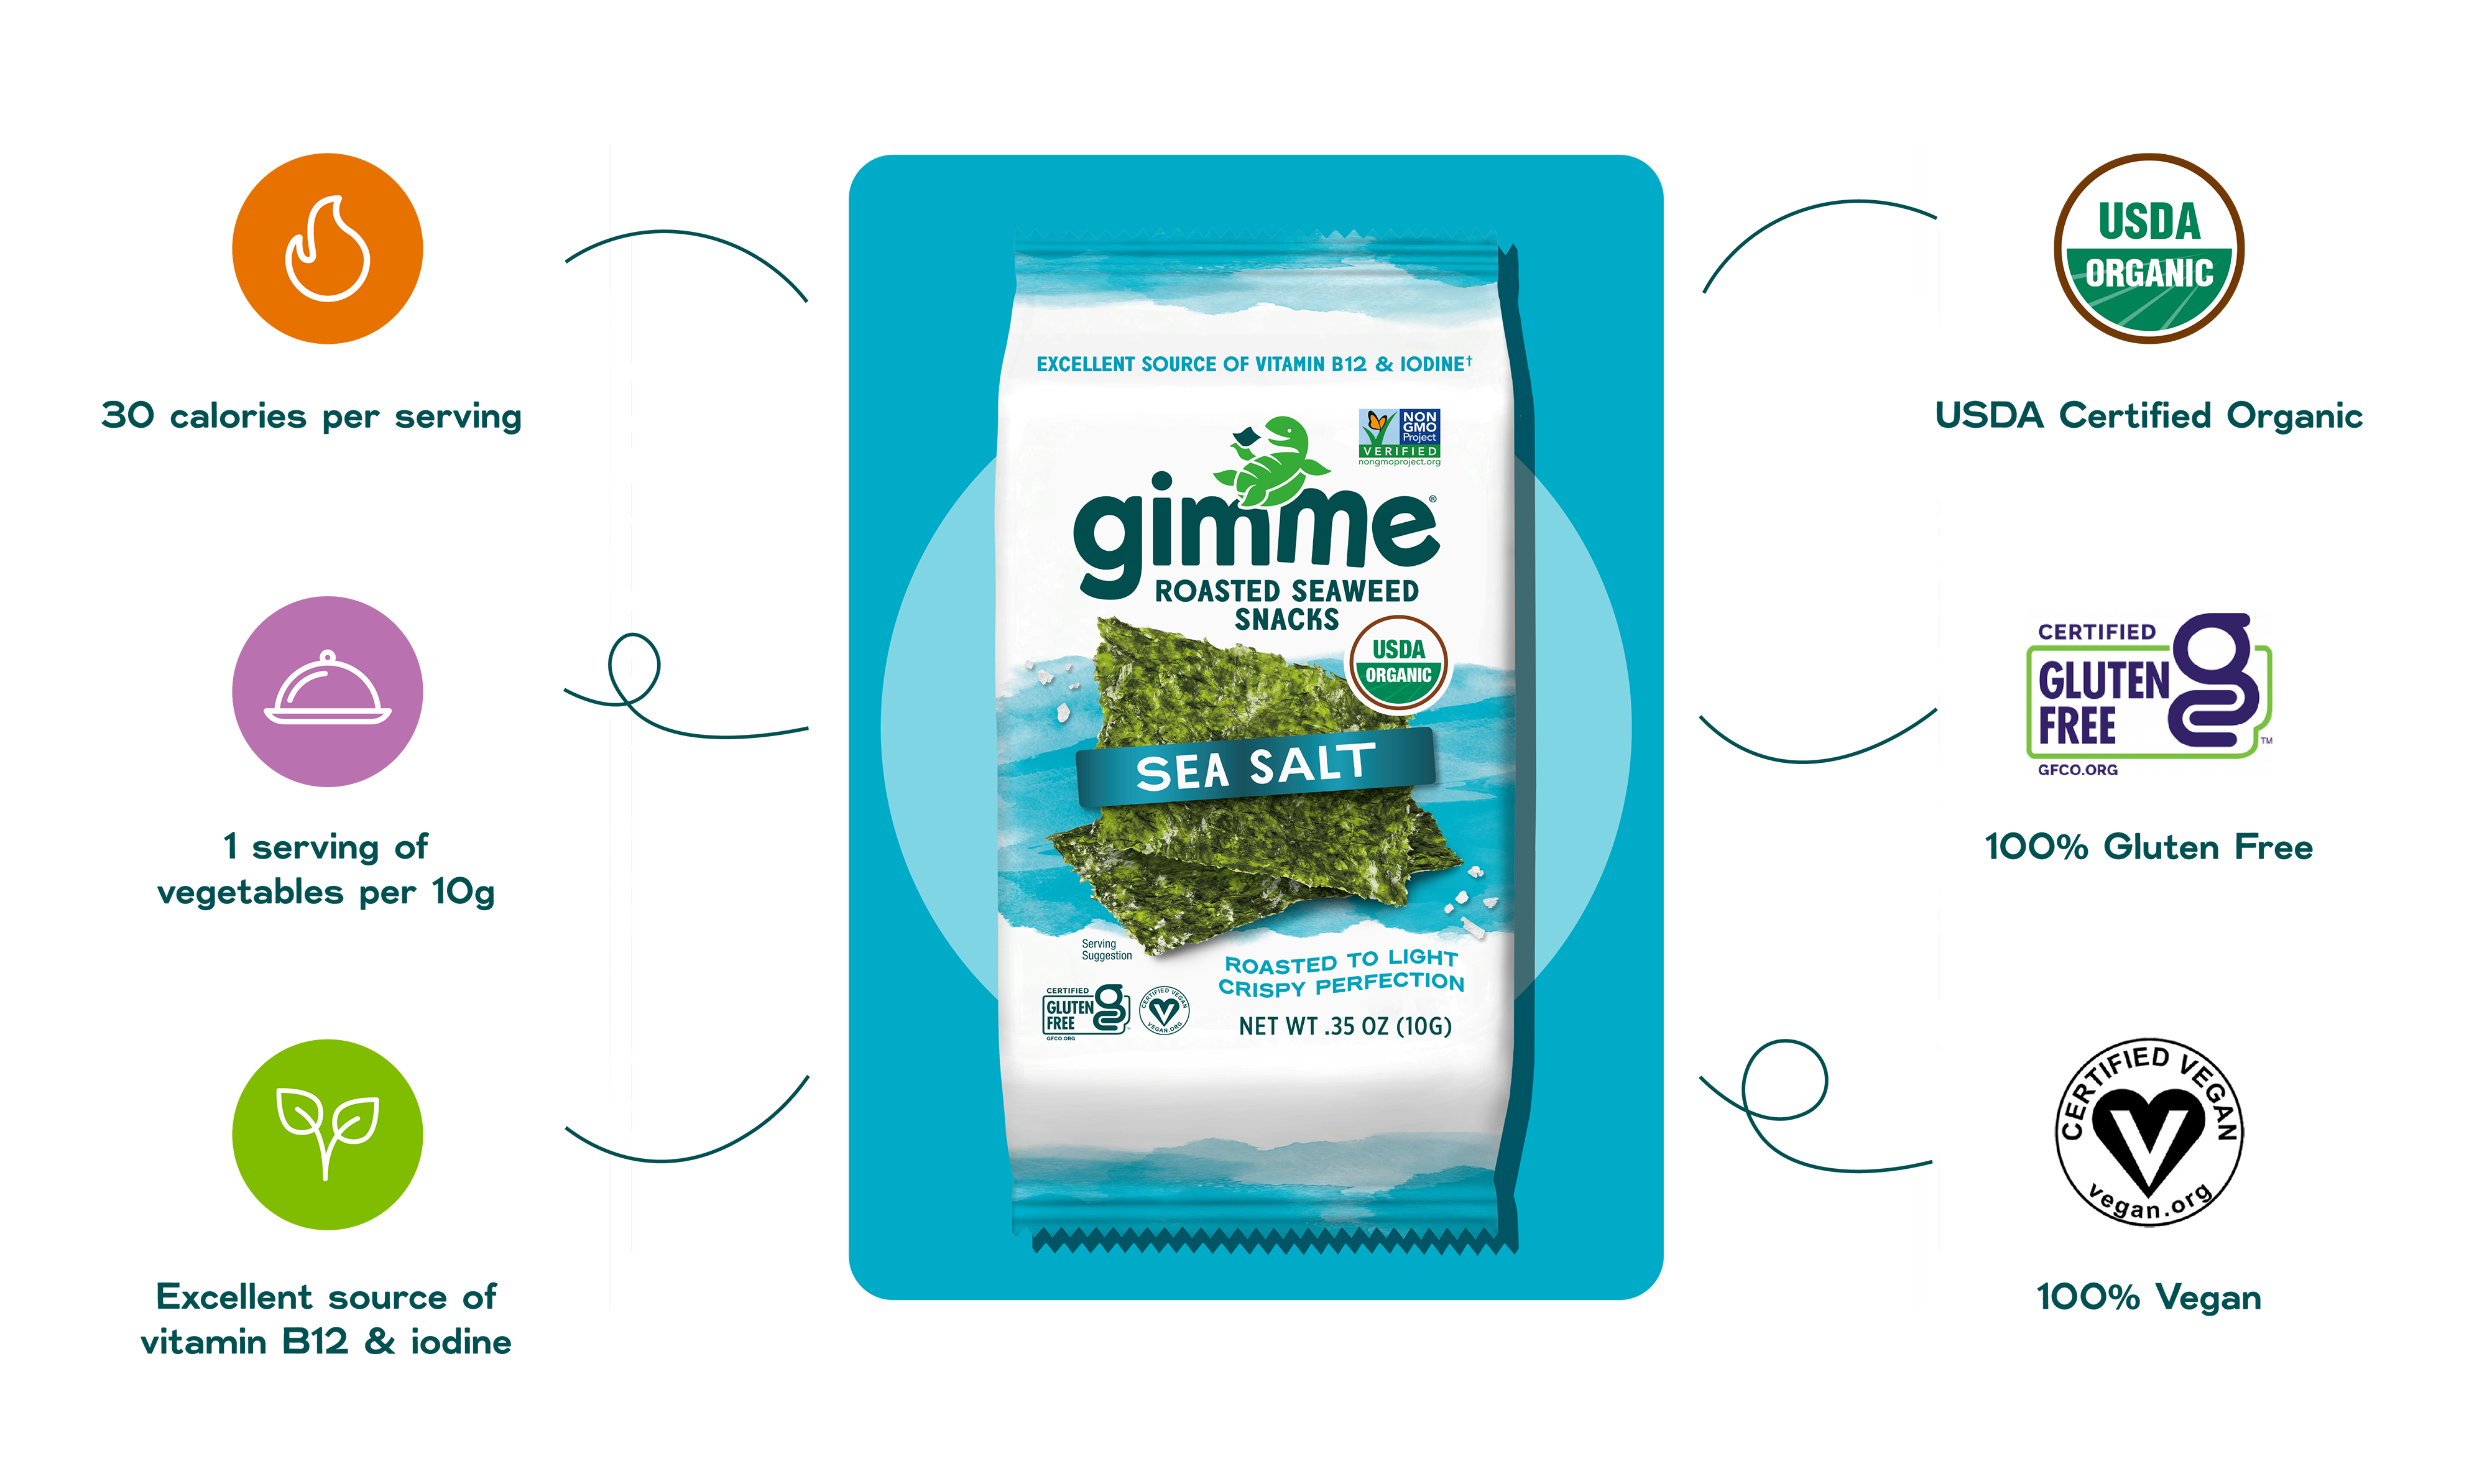 gimme seaweed snacks are good and good for you